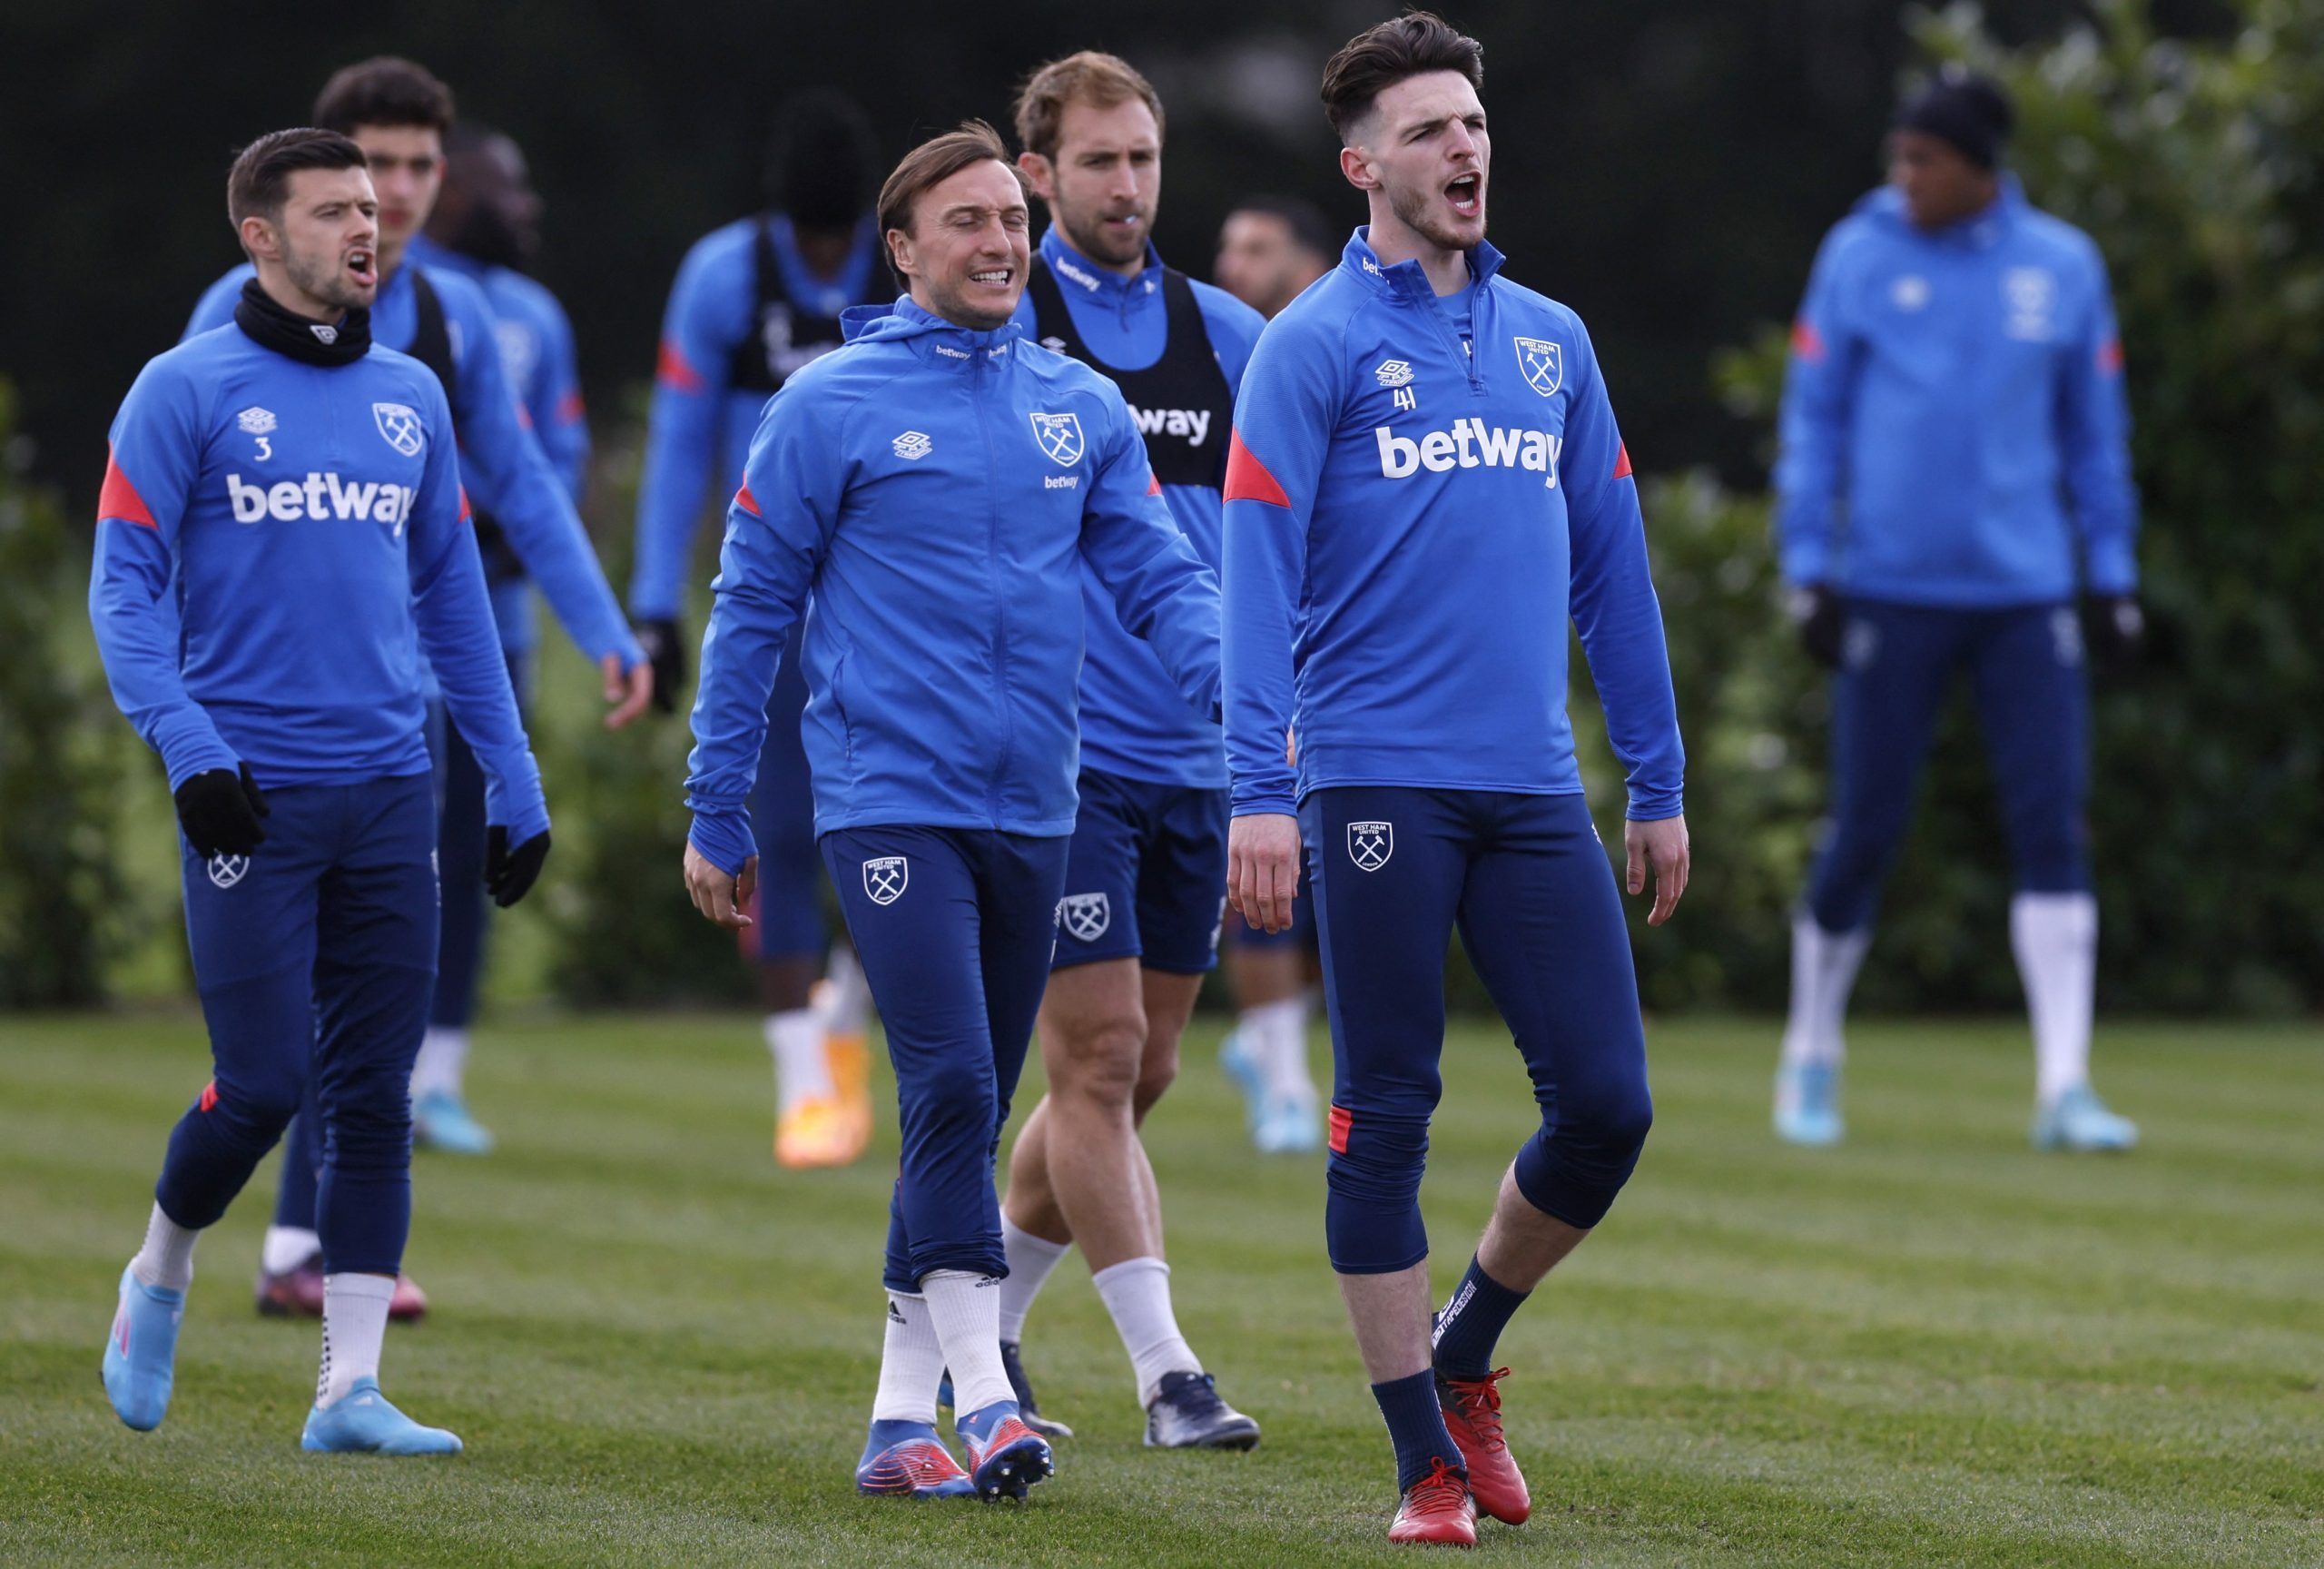 Soccer Football - Europa League - West Ham United Training - Rush Green, Romford, Britain - March 9, 2022 West Ham United's Declan Rice, Aaron Cresswell and Mark Noble during training Action Images via Reuters/Andrew Couldridge